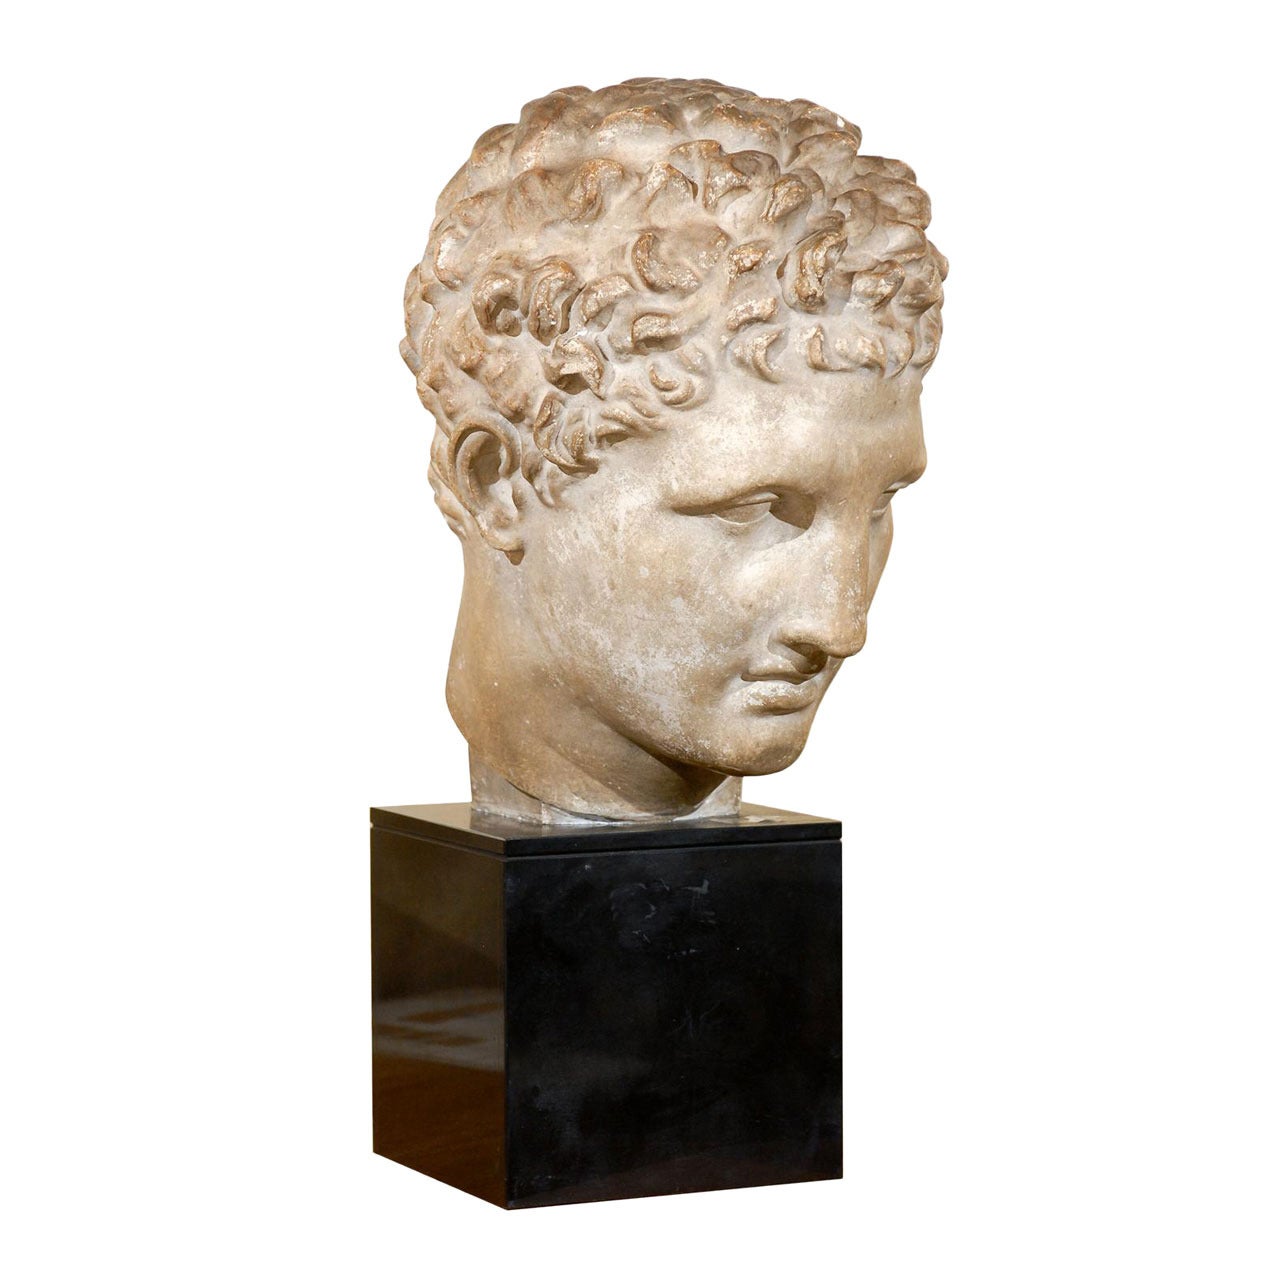 19th Century Classical Roman Bust in Plaster on Black Stone Base